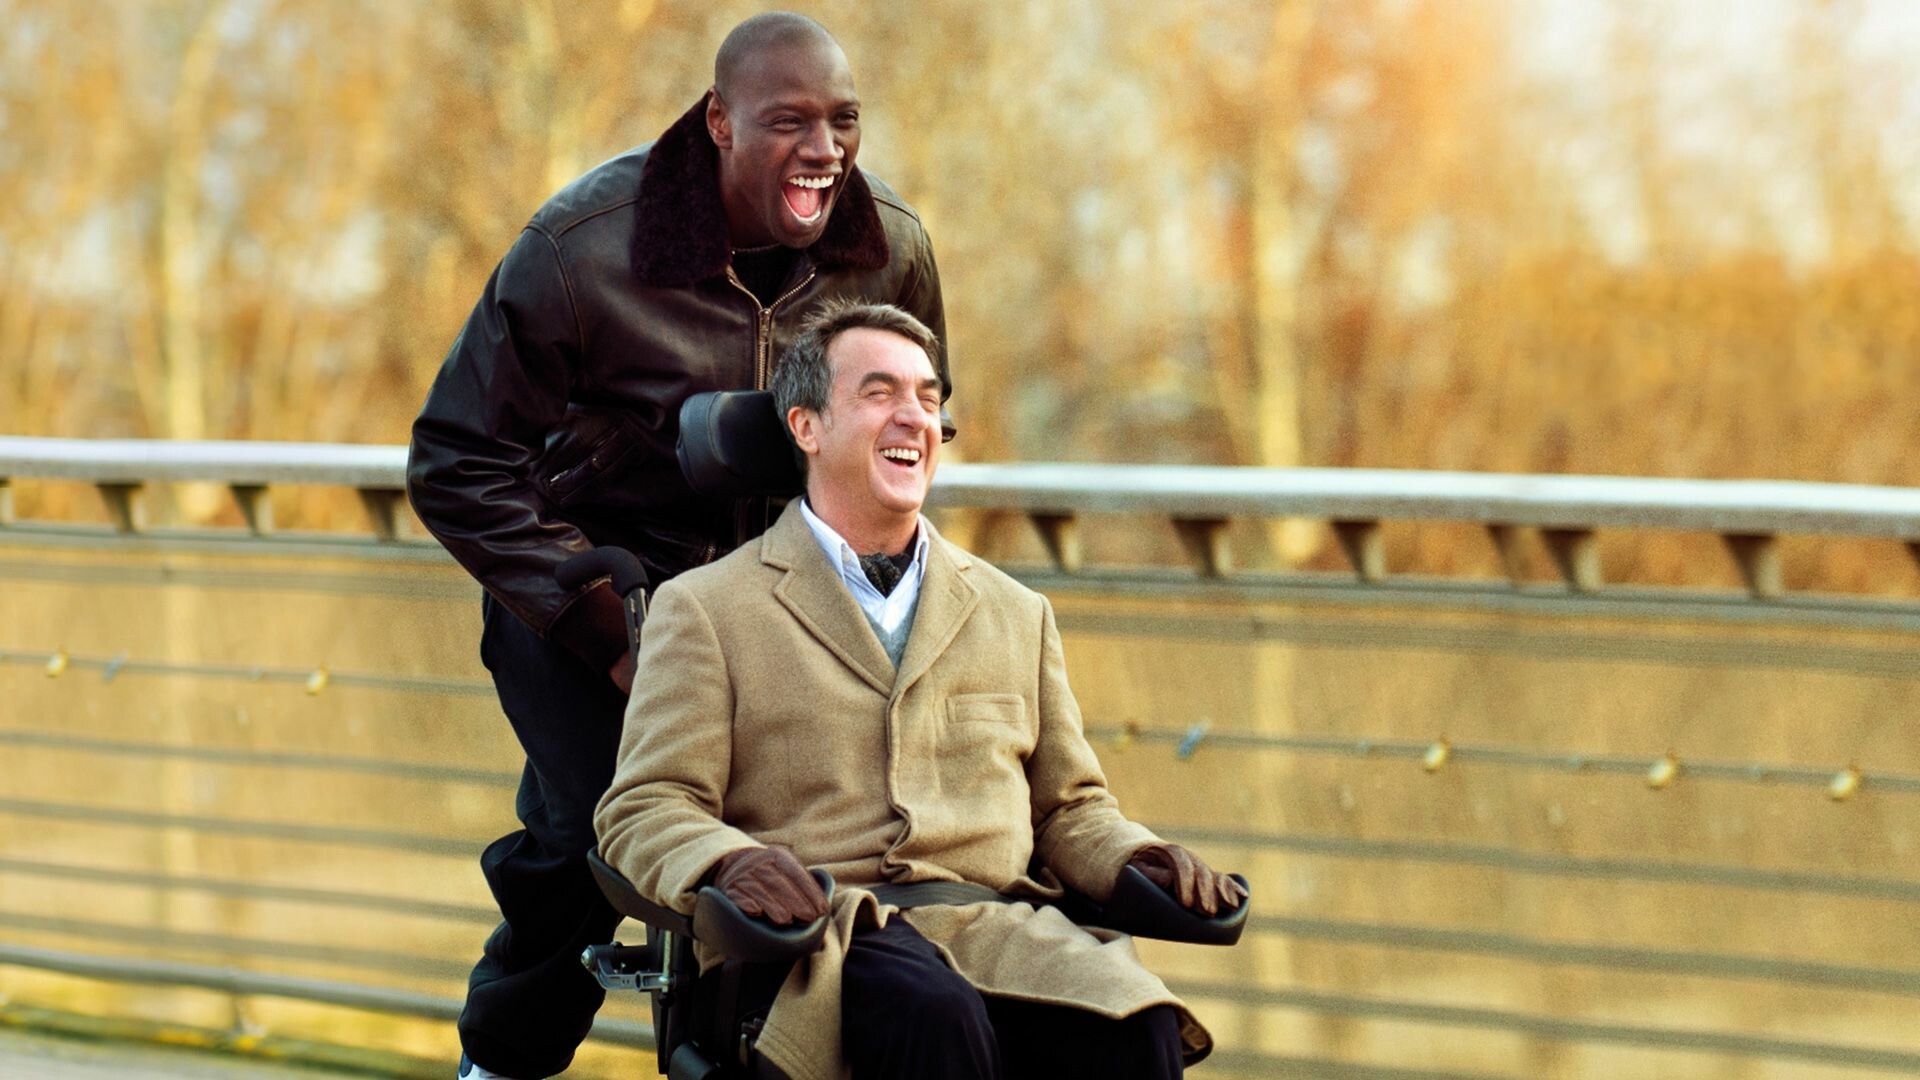 Omar Sy: Known for his role in the multi-award winning French film The Intouchables. 1920x1080 Full HD Wallpaper.